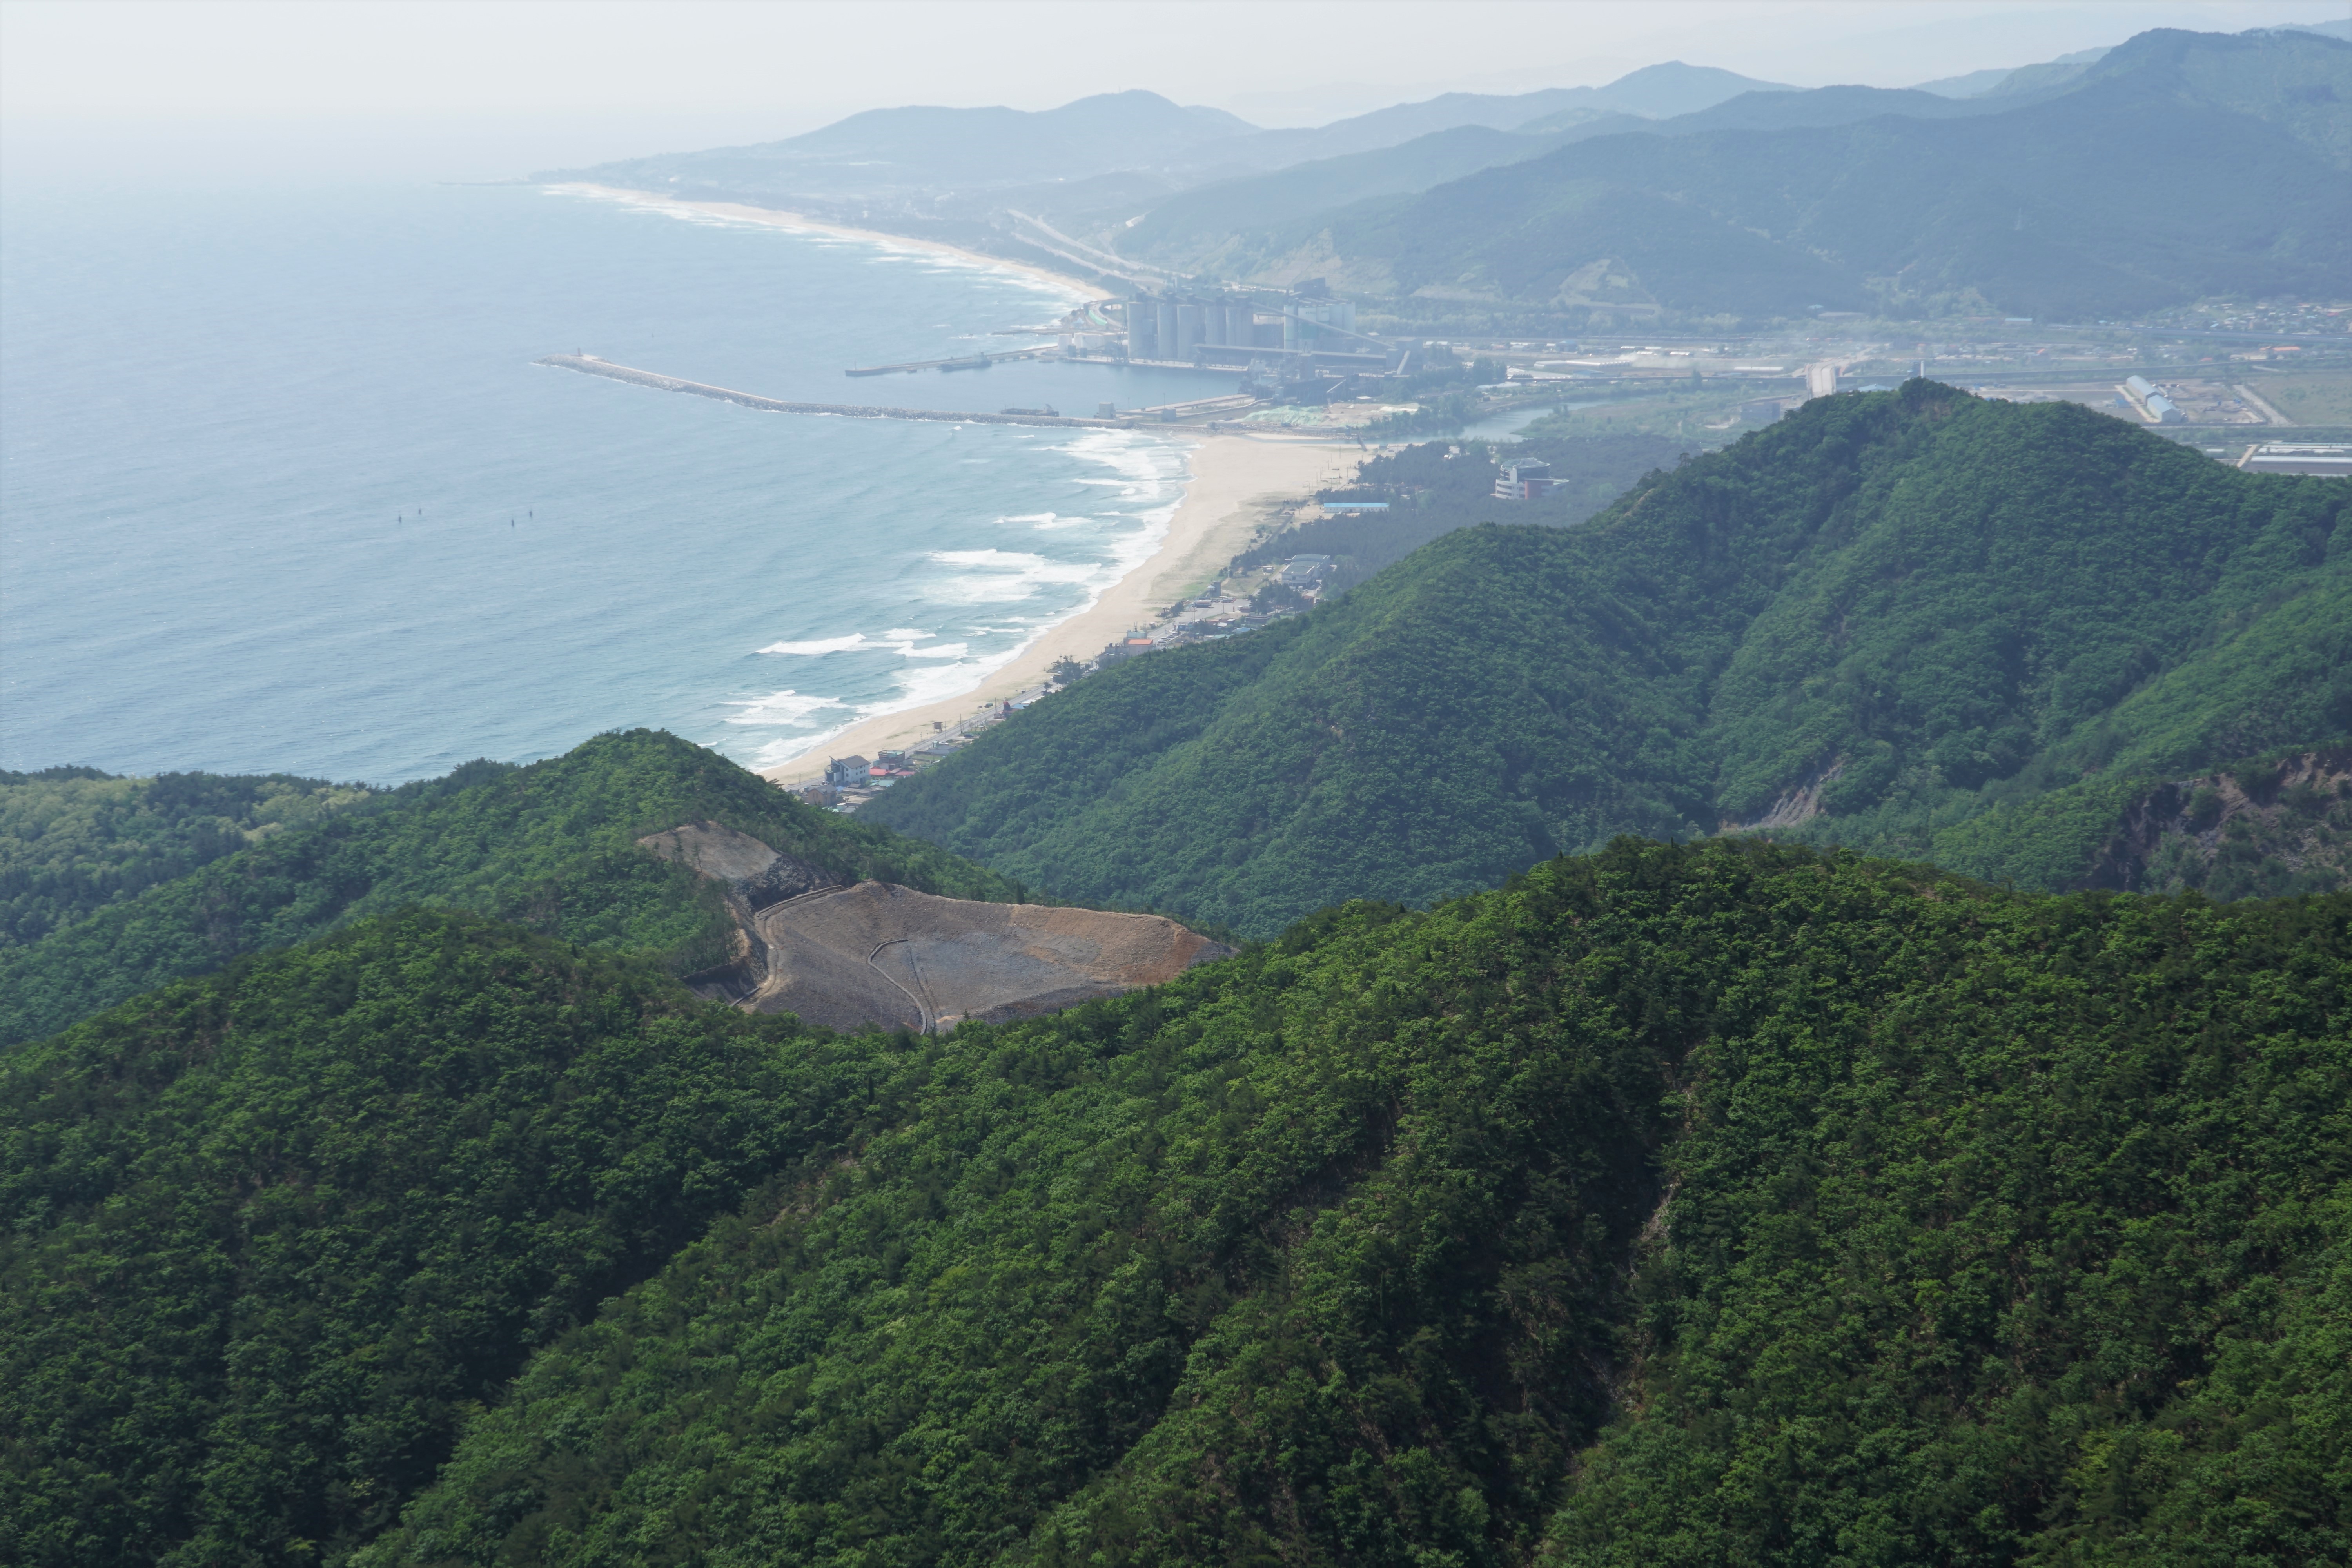 South Korea’s most challenging natural attraction, the 71-kilometre Ultra Baugil trail arcs around Gangneung’s alpine rim, giving trekkers the chance to experience nature at its best in one of Asia’s most heavily developed countries